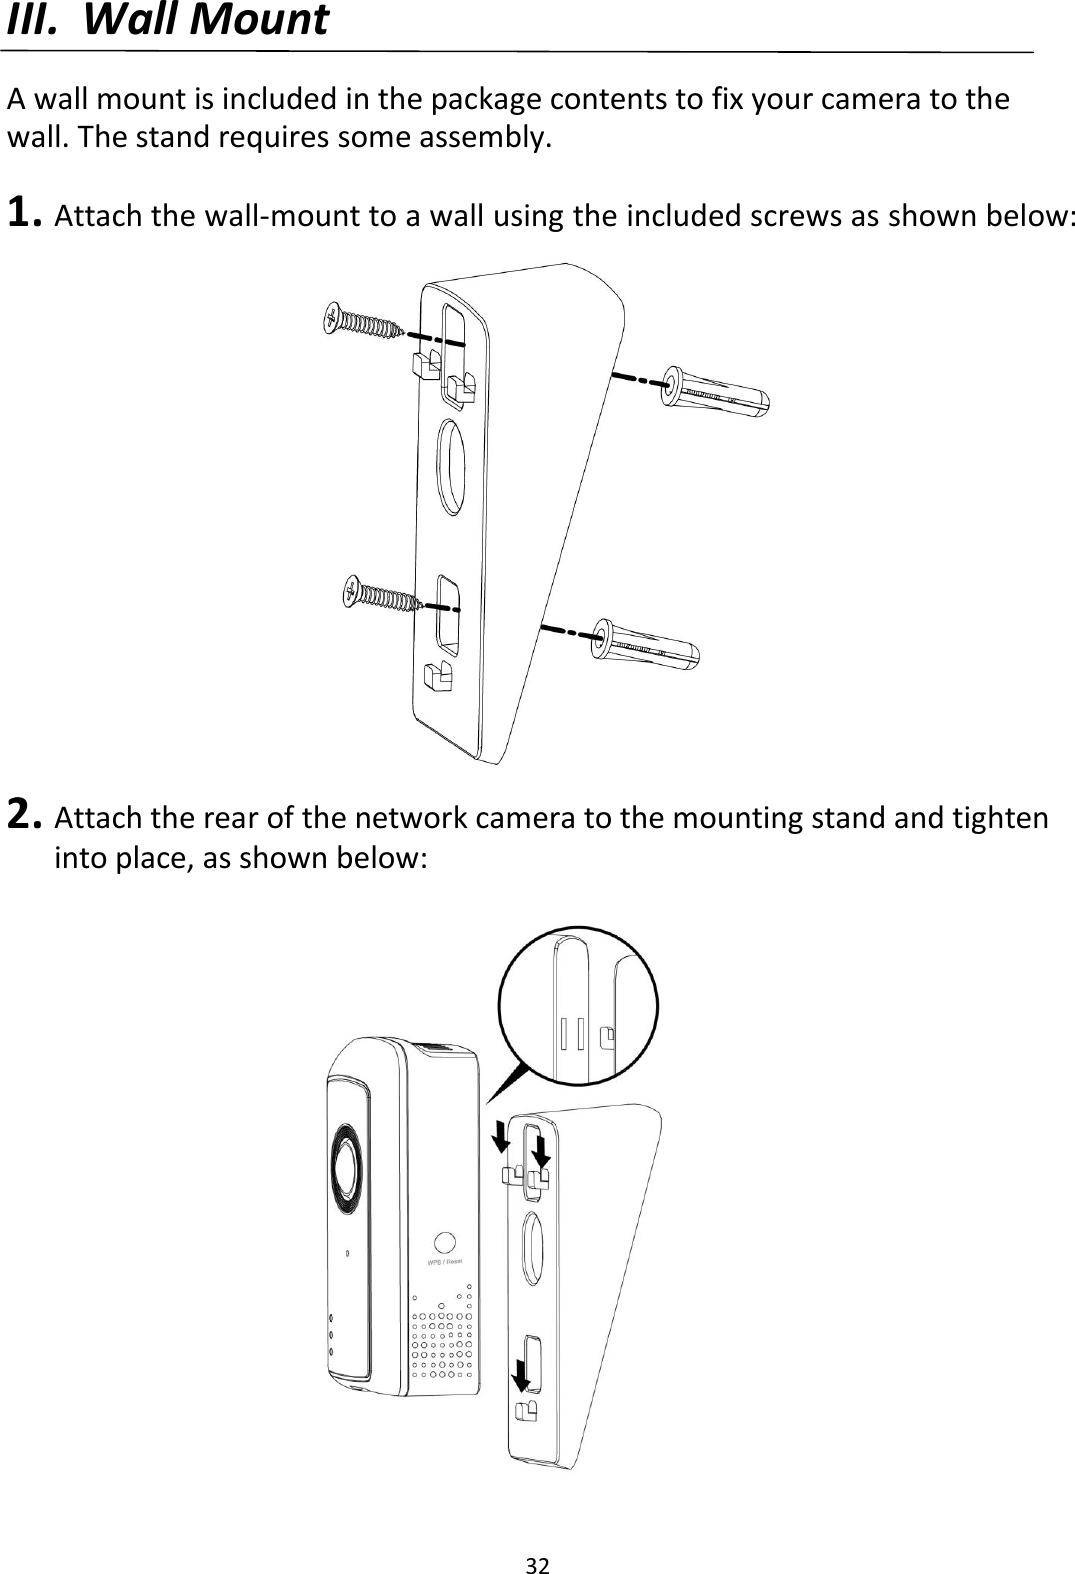 32  III. Wall Mount  A wall mount is included in the package contents to fix your camera to the wall. The stand requires some assembly.  1. Attach the wall-mount to a wall using the included screws as shown below:  2. Attach the rear of the network camera to the mounting stand and tighten into place, as shown below:  